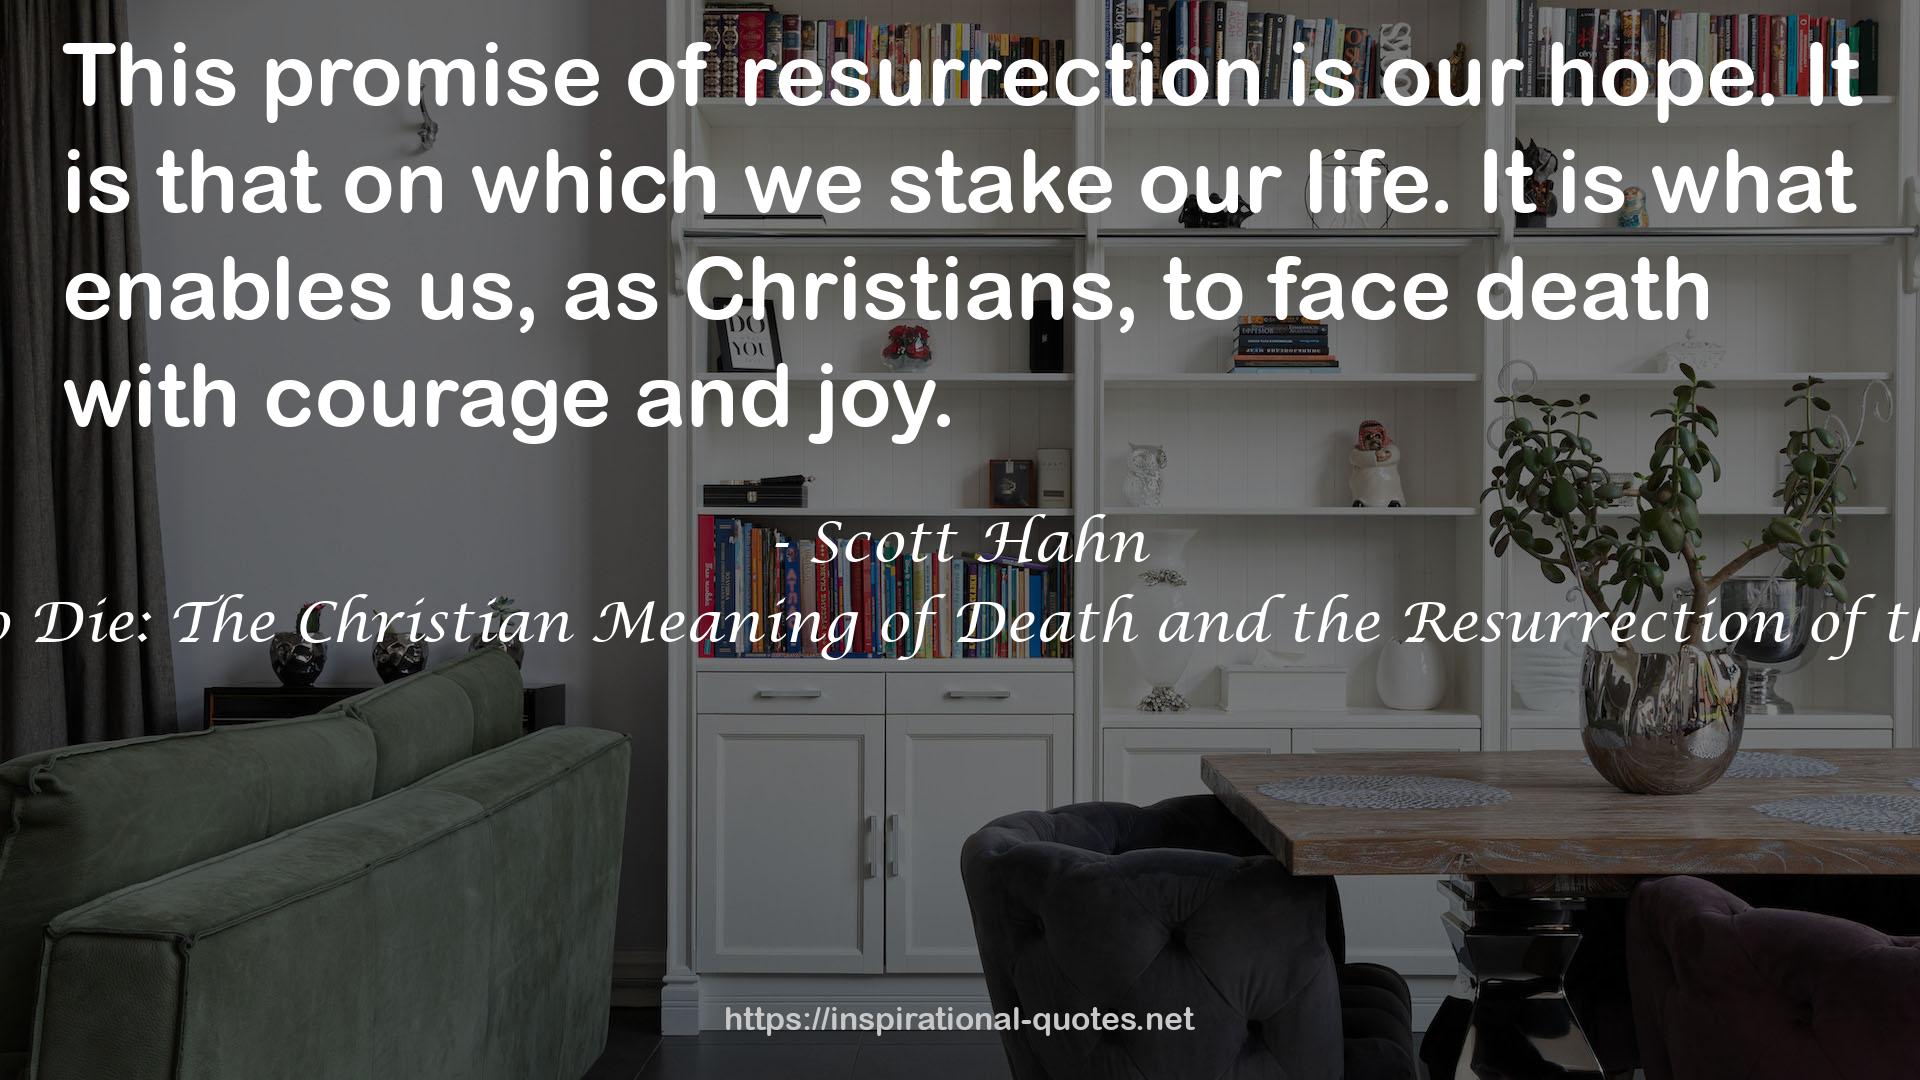 Hope to Die: The Christian Meaning of Death and the Resurrection of the Body QUOTES